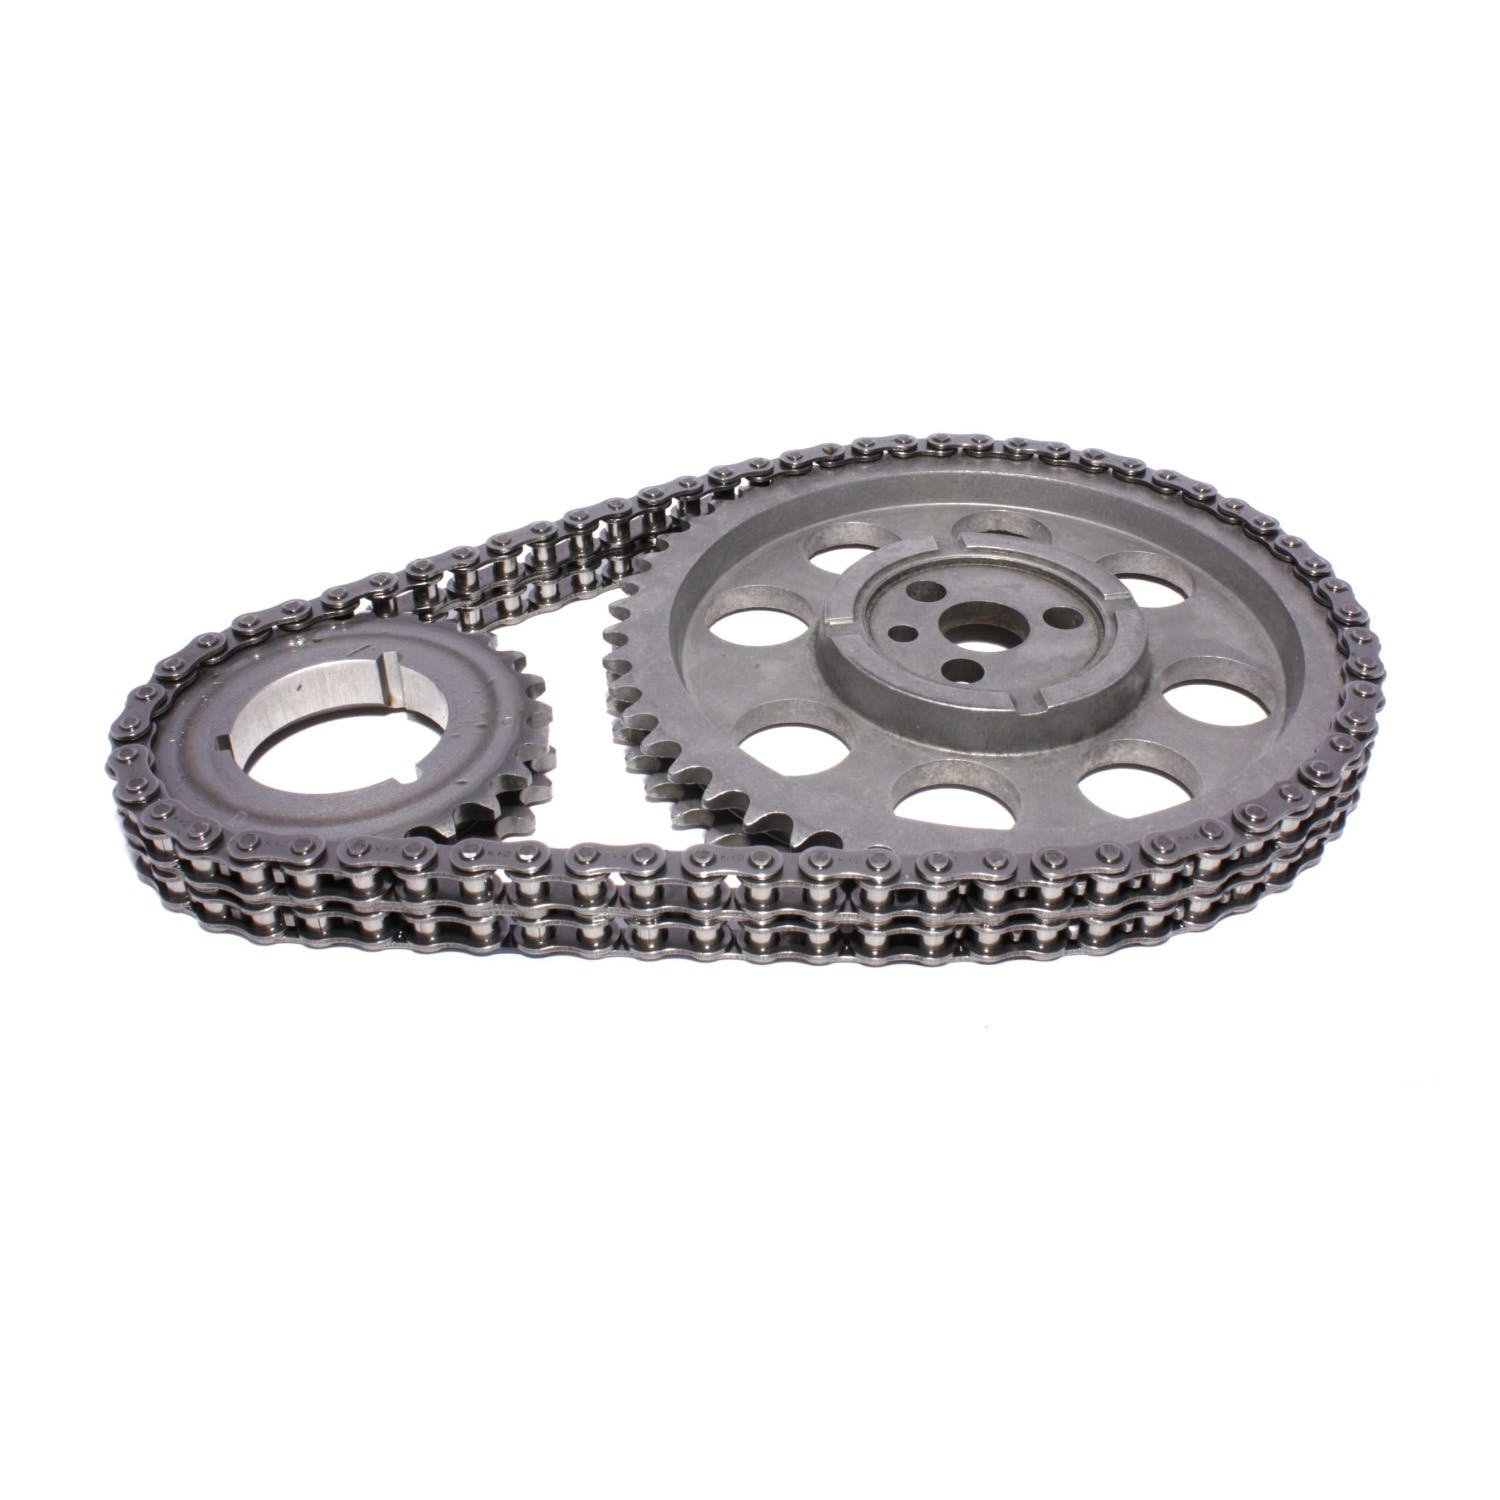 Competition Cams 2100 Magnum Double Roller Timing Set